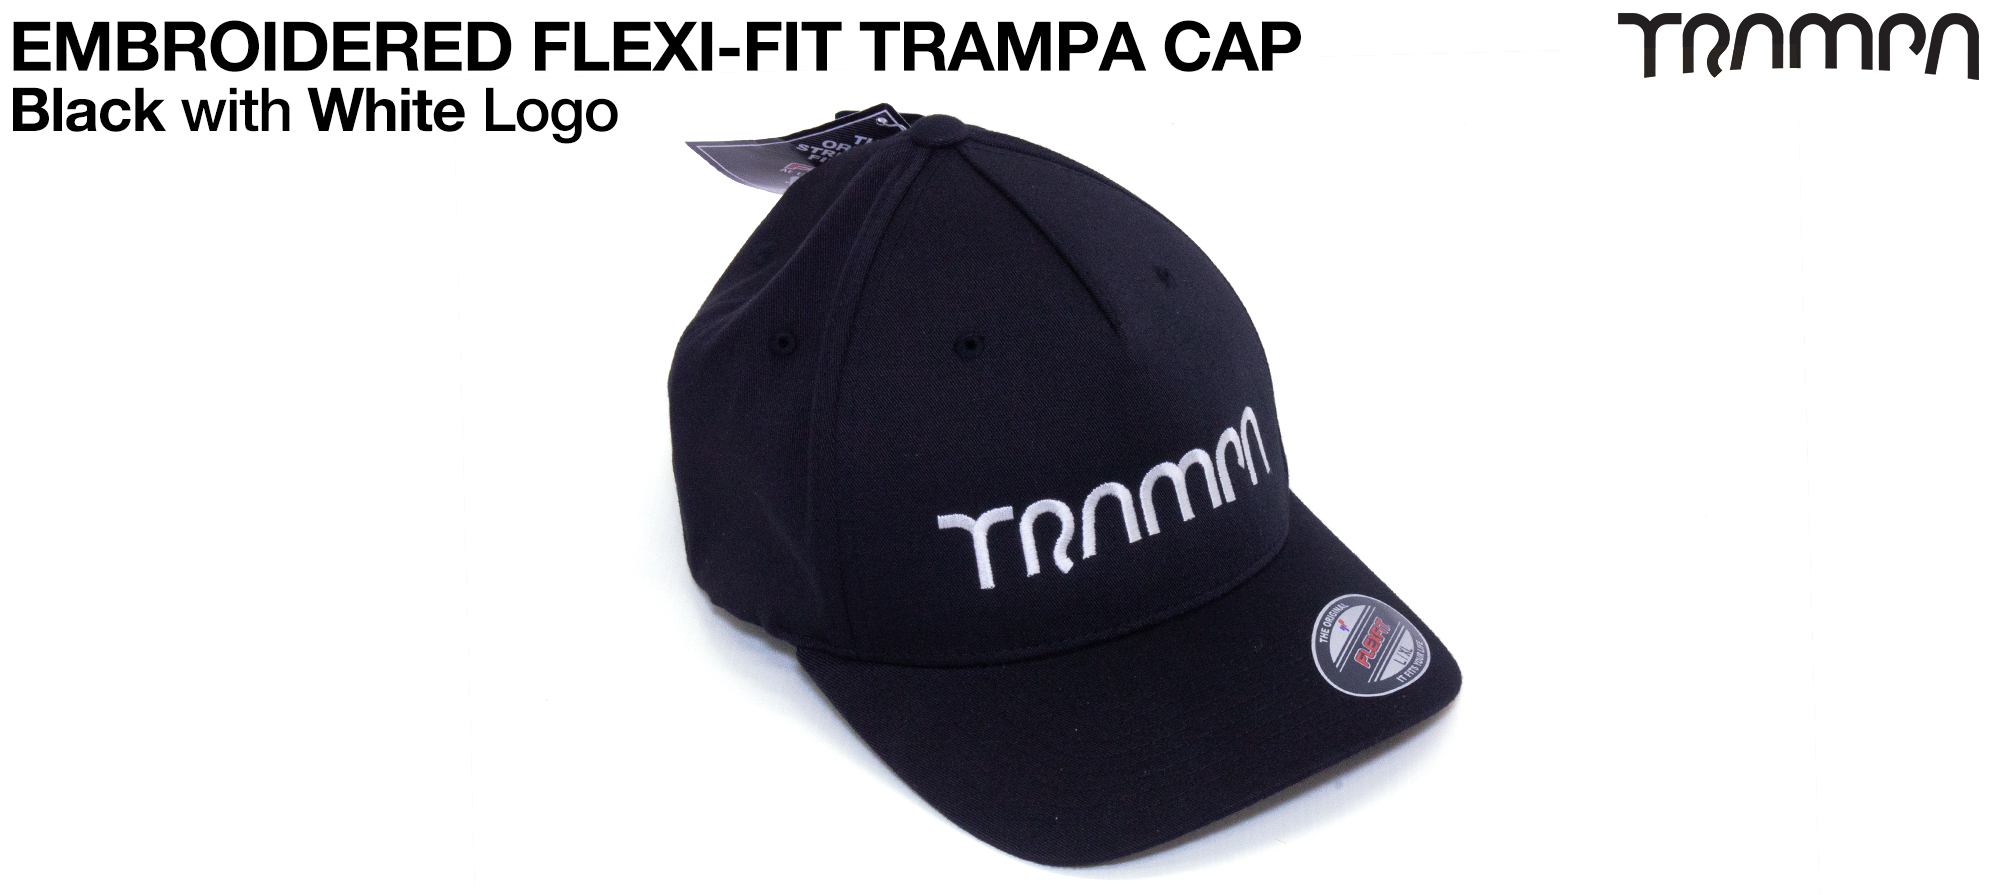 BLACK with WHITE Embroidered TRAMPA logo 5 Panel FLEXI-FIT Cap - SMALL / MEDIUM